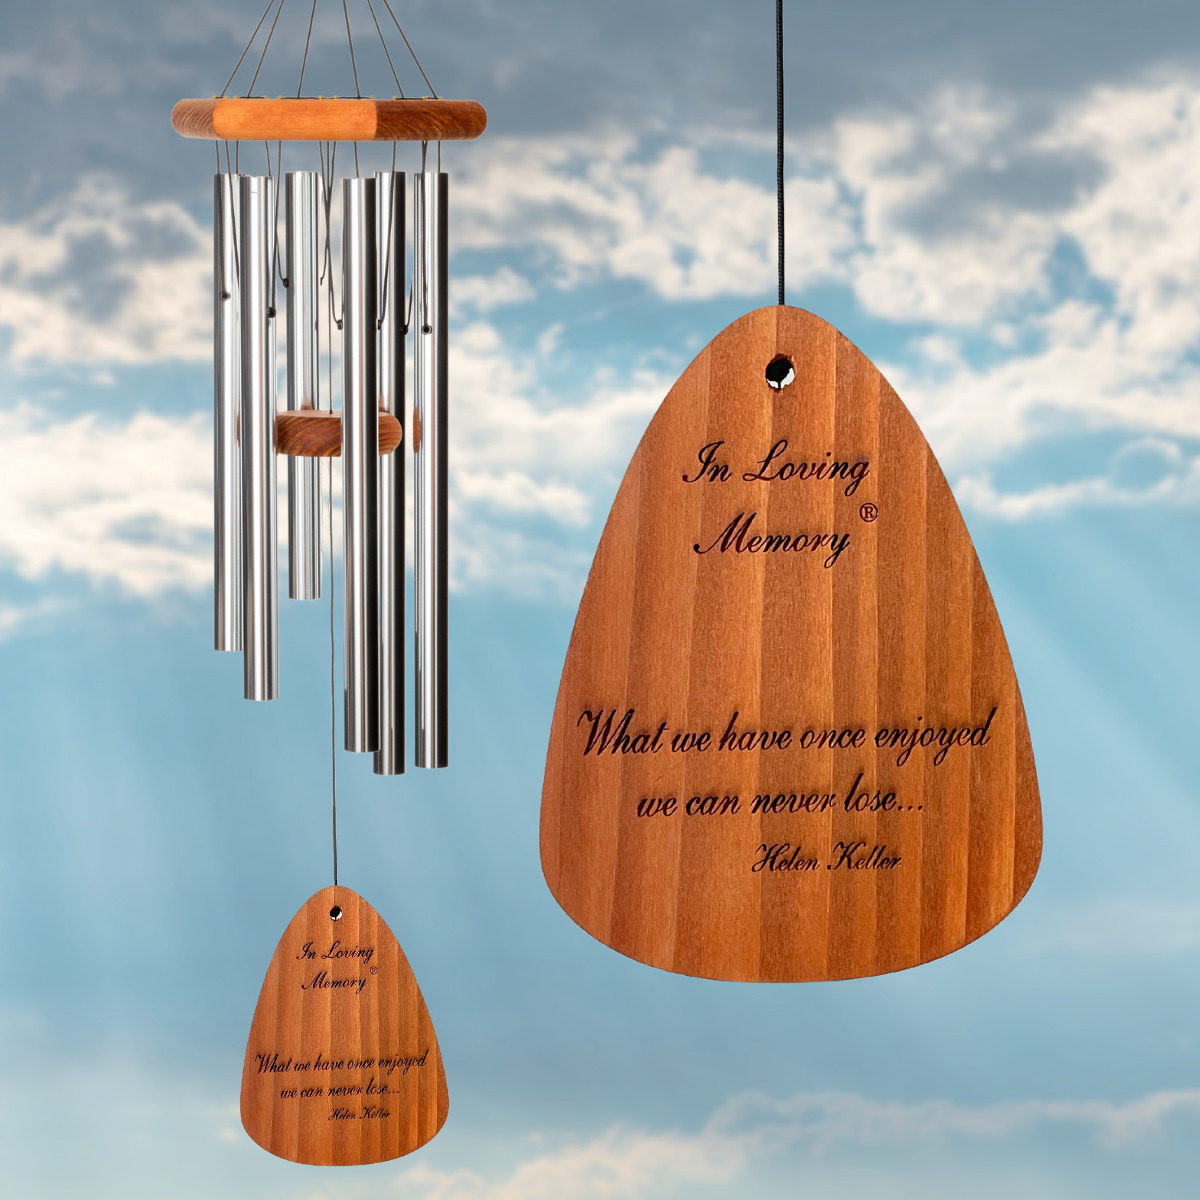 In Loving Memory 30 Inch Windchime - What we have once enjoyed - Silver